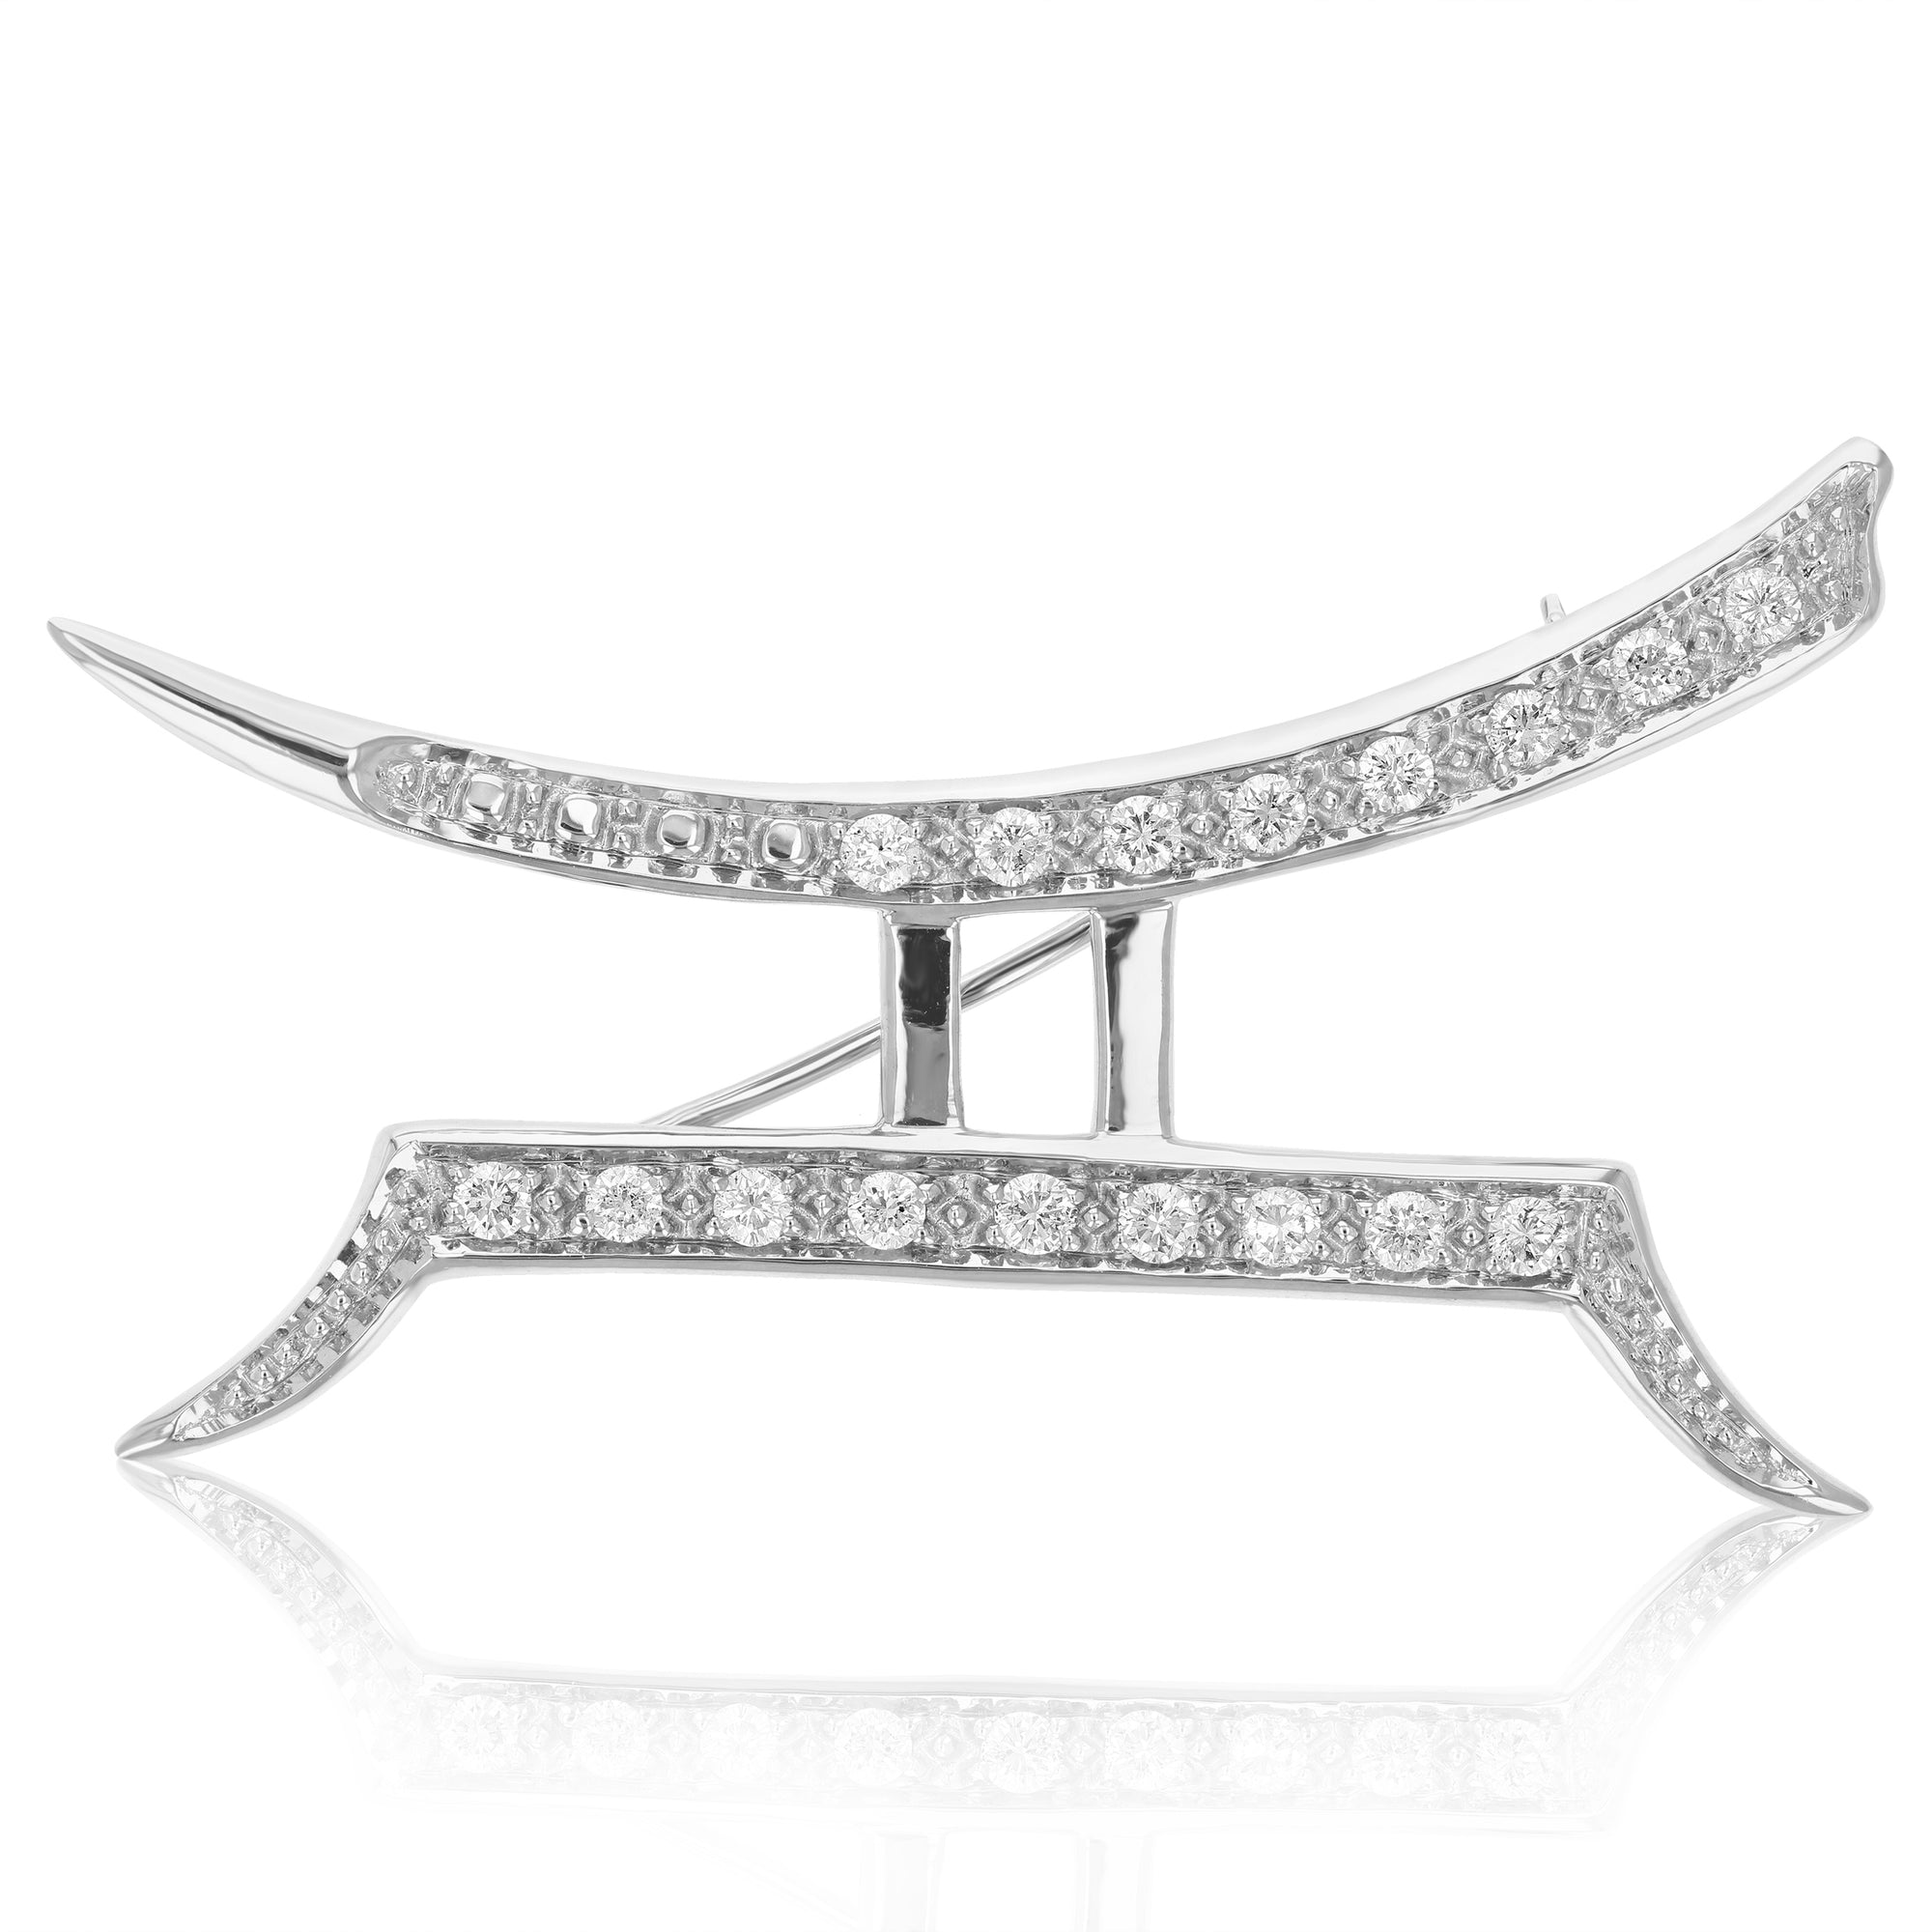 1/2 cttw Diamond Brooch Pin, Brooch Pin for Women Fashion in 14K White Gold, Prong Setting, 1 3/4 Inch